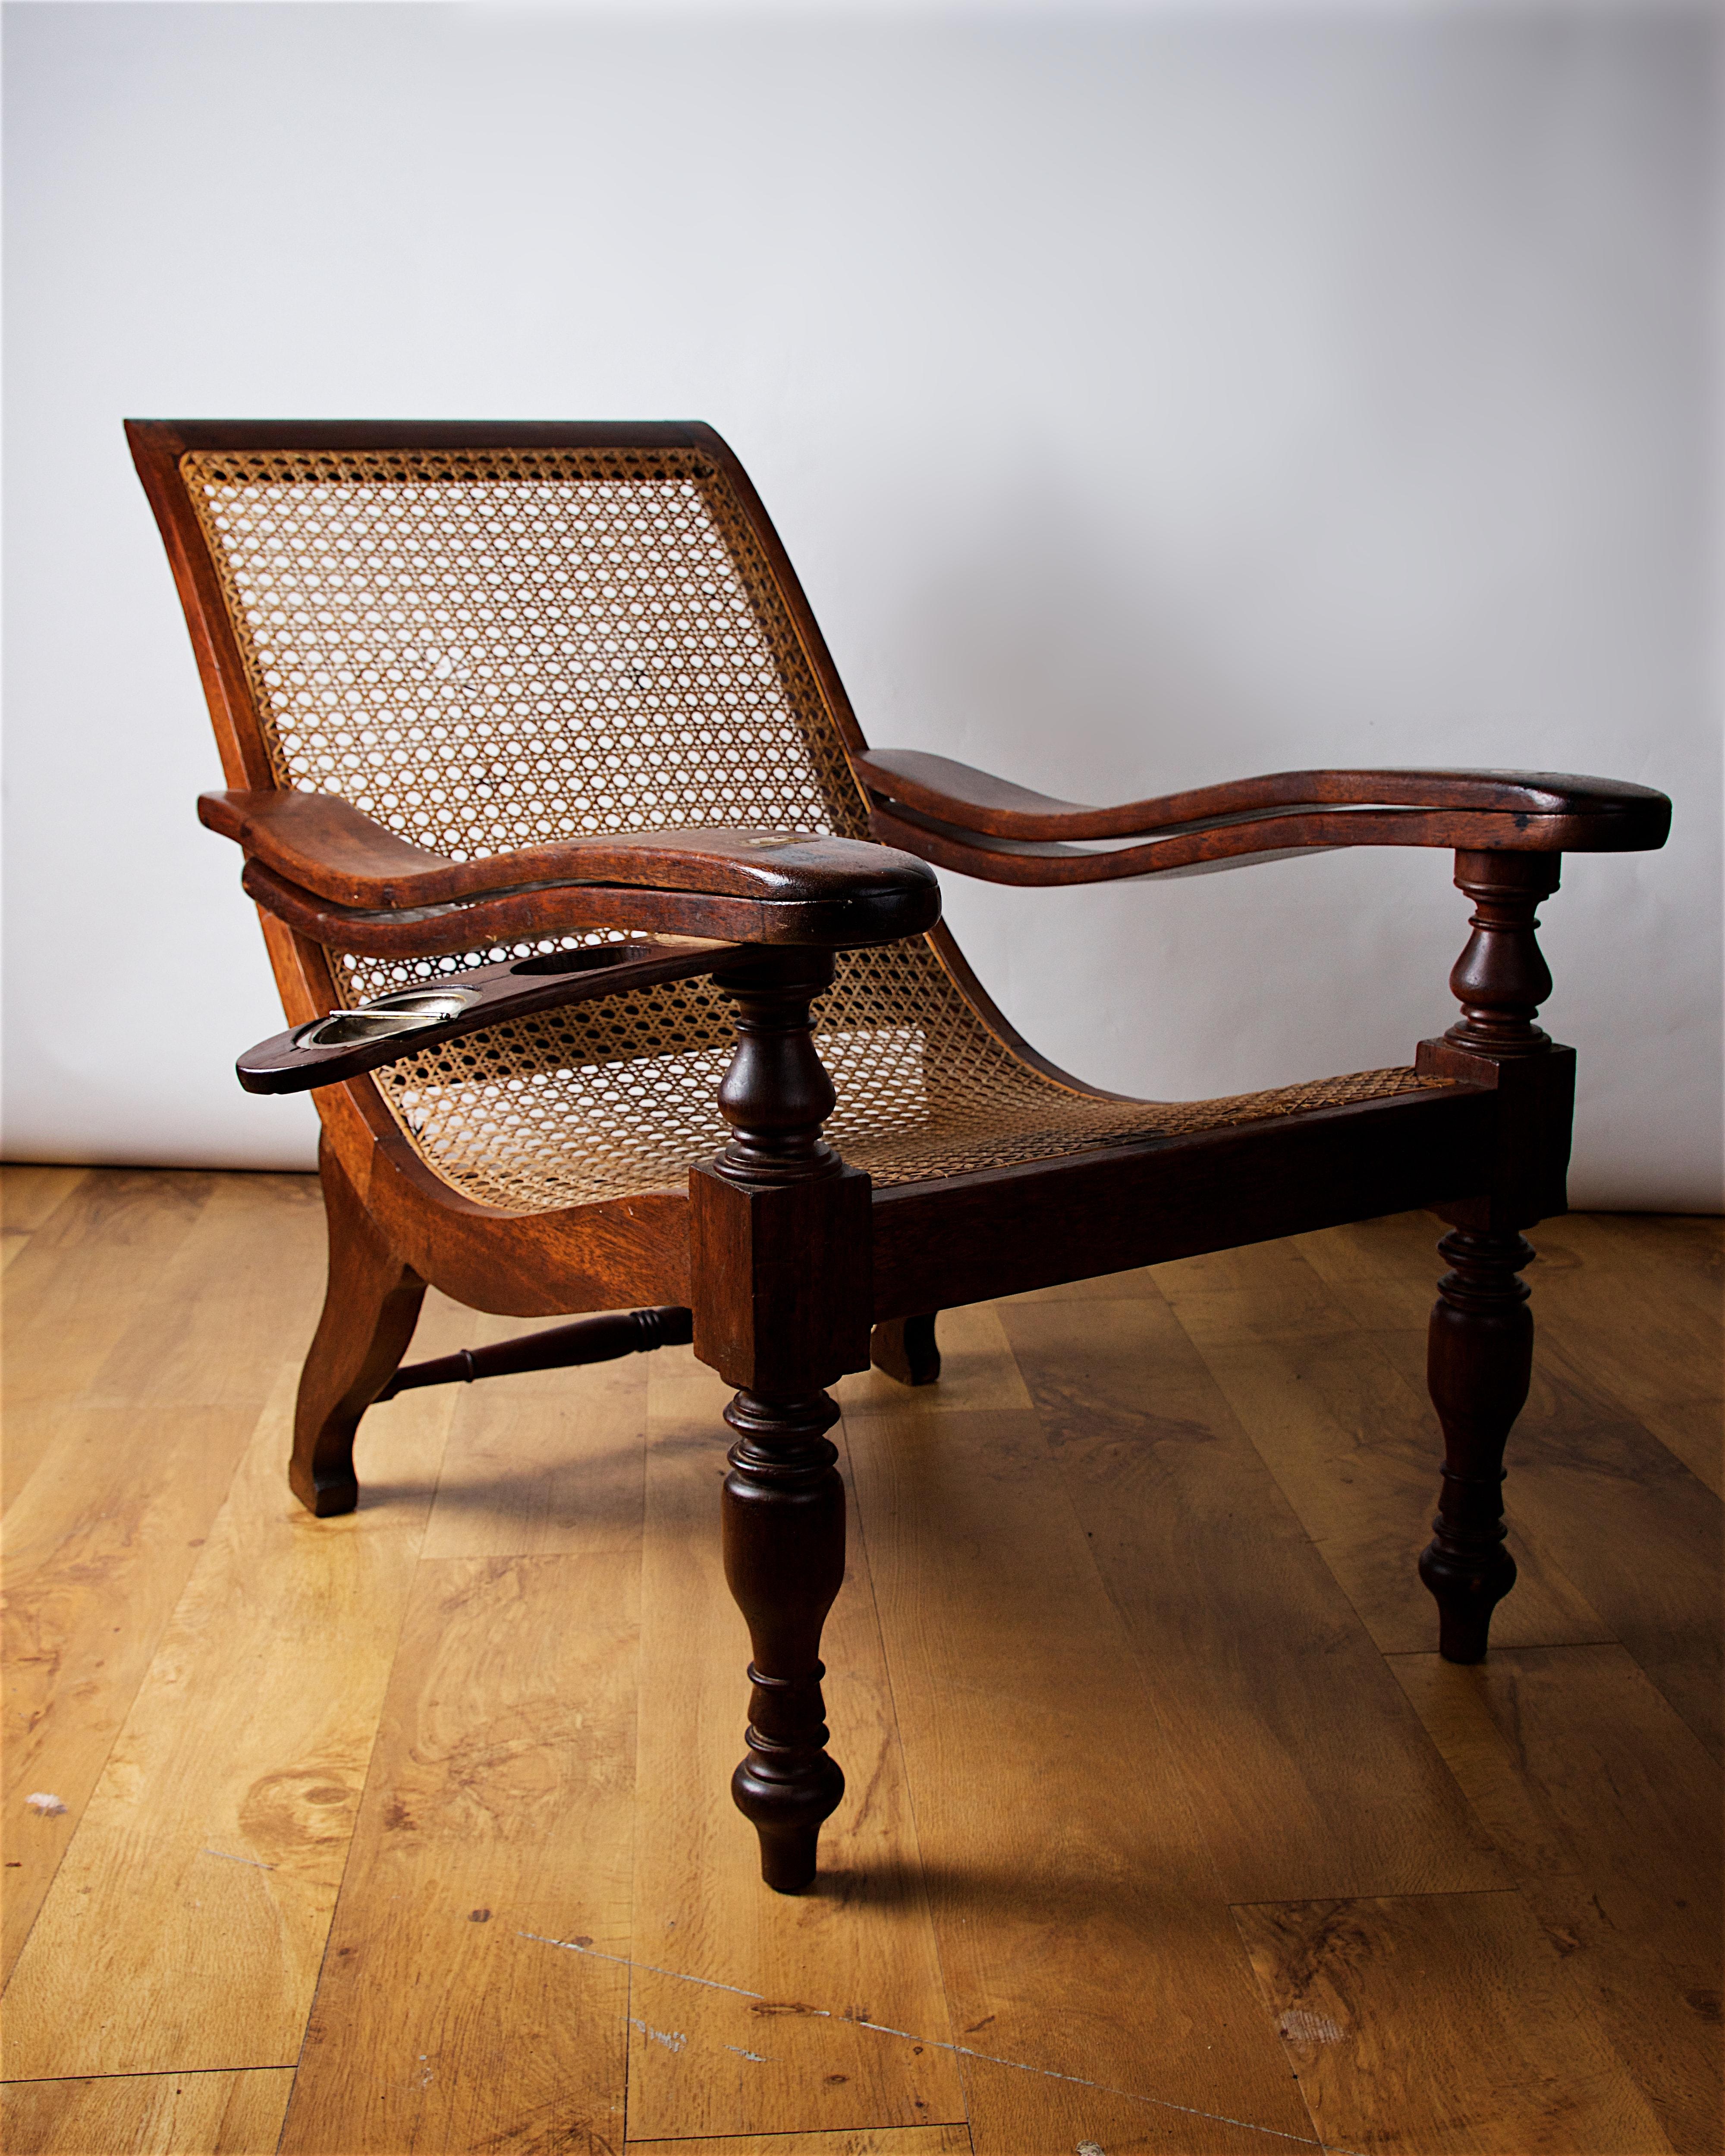 19th Century Victorian Teak and Rattan Plantation Steamer Chair For Sale